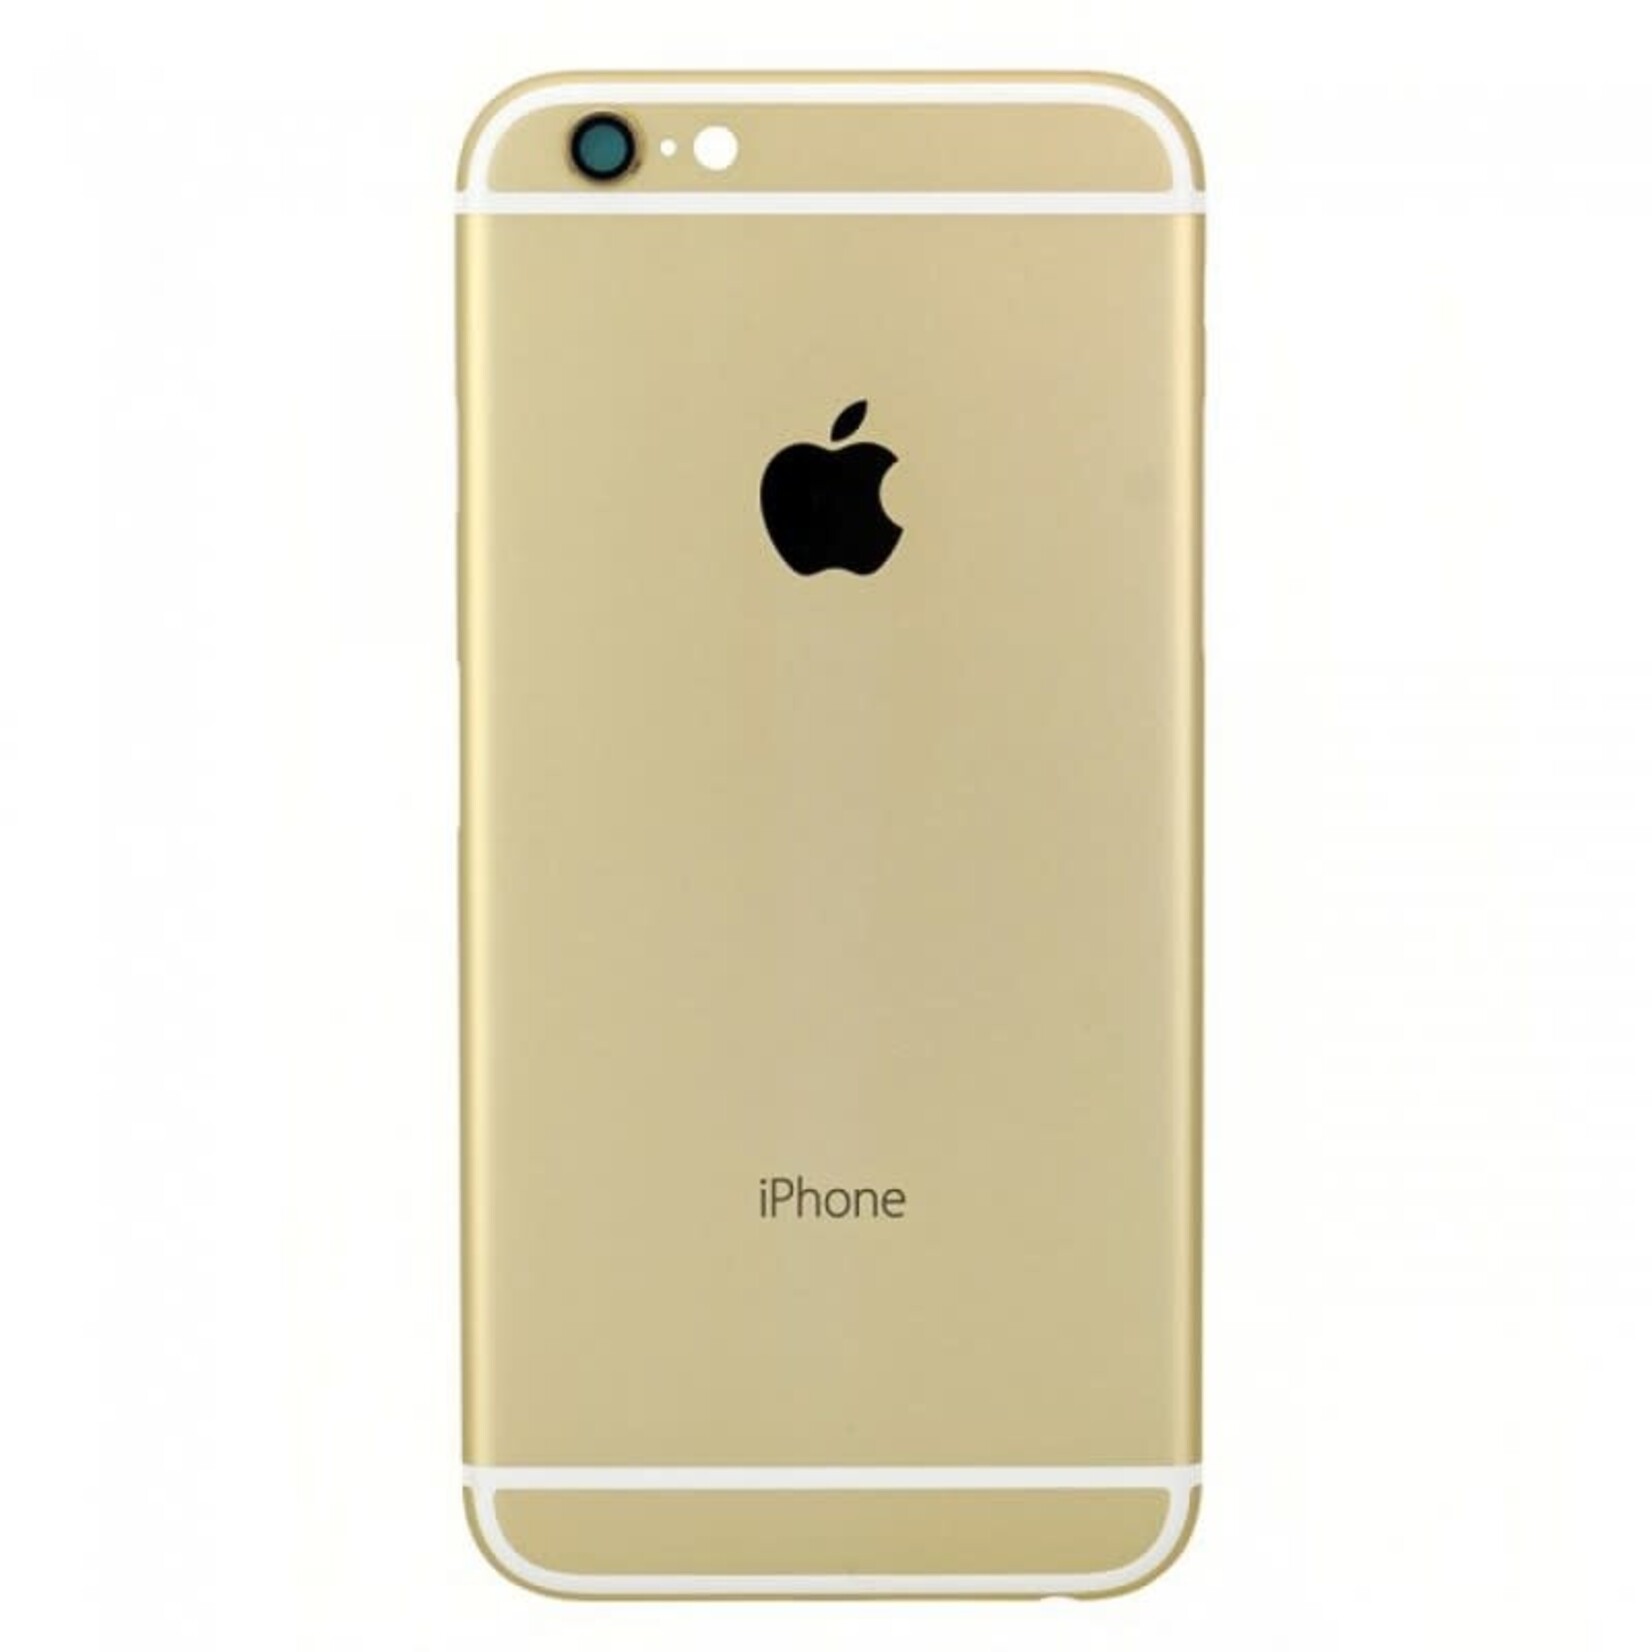 Apple BACK HOUSING POUR IPHONE 6  OR GOLD